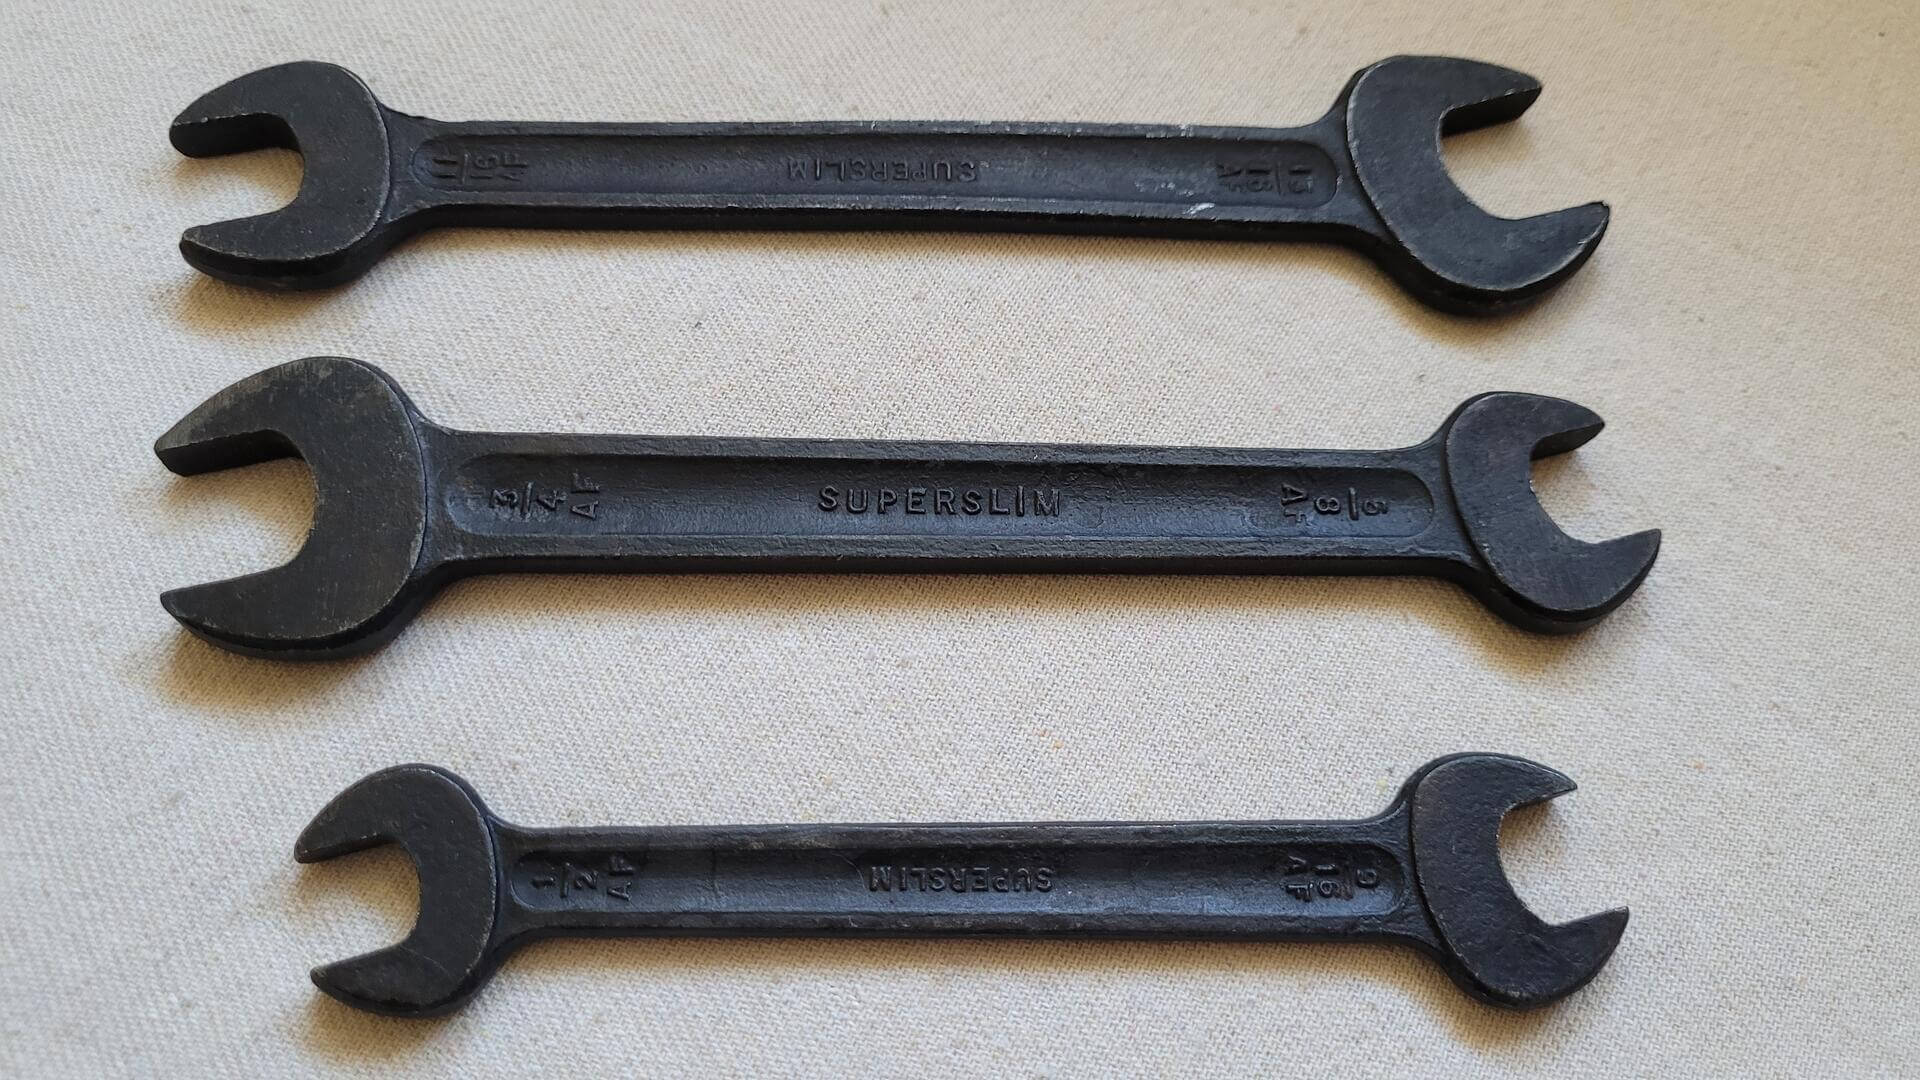 Beautiful vintage set of three T. Williams Drop Forge & Tools Ltd black-phosphate coating open end spanner wrenches. Antique made in England collectible mechanic hand tools 13/16 11/16 3/4 5/8 9/16 and 1/2 sizes